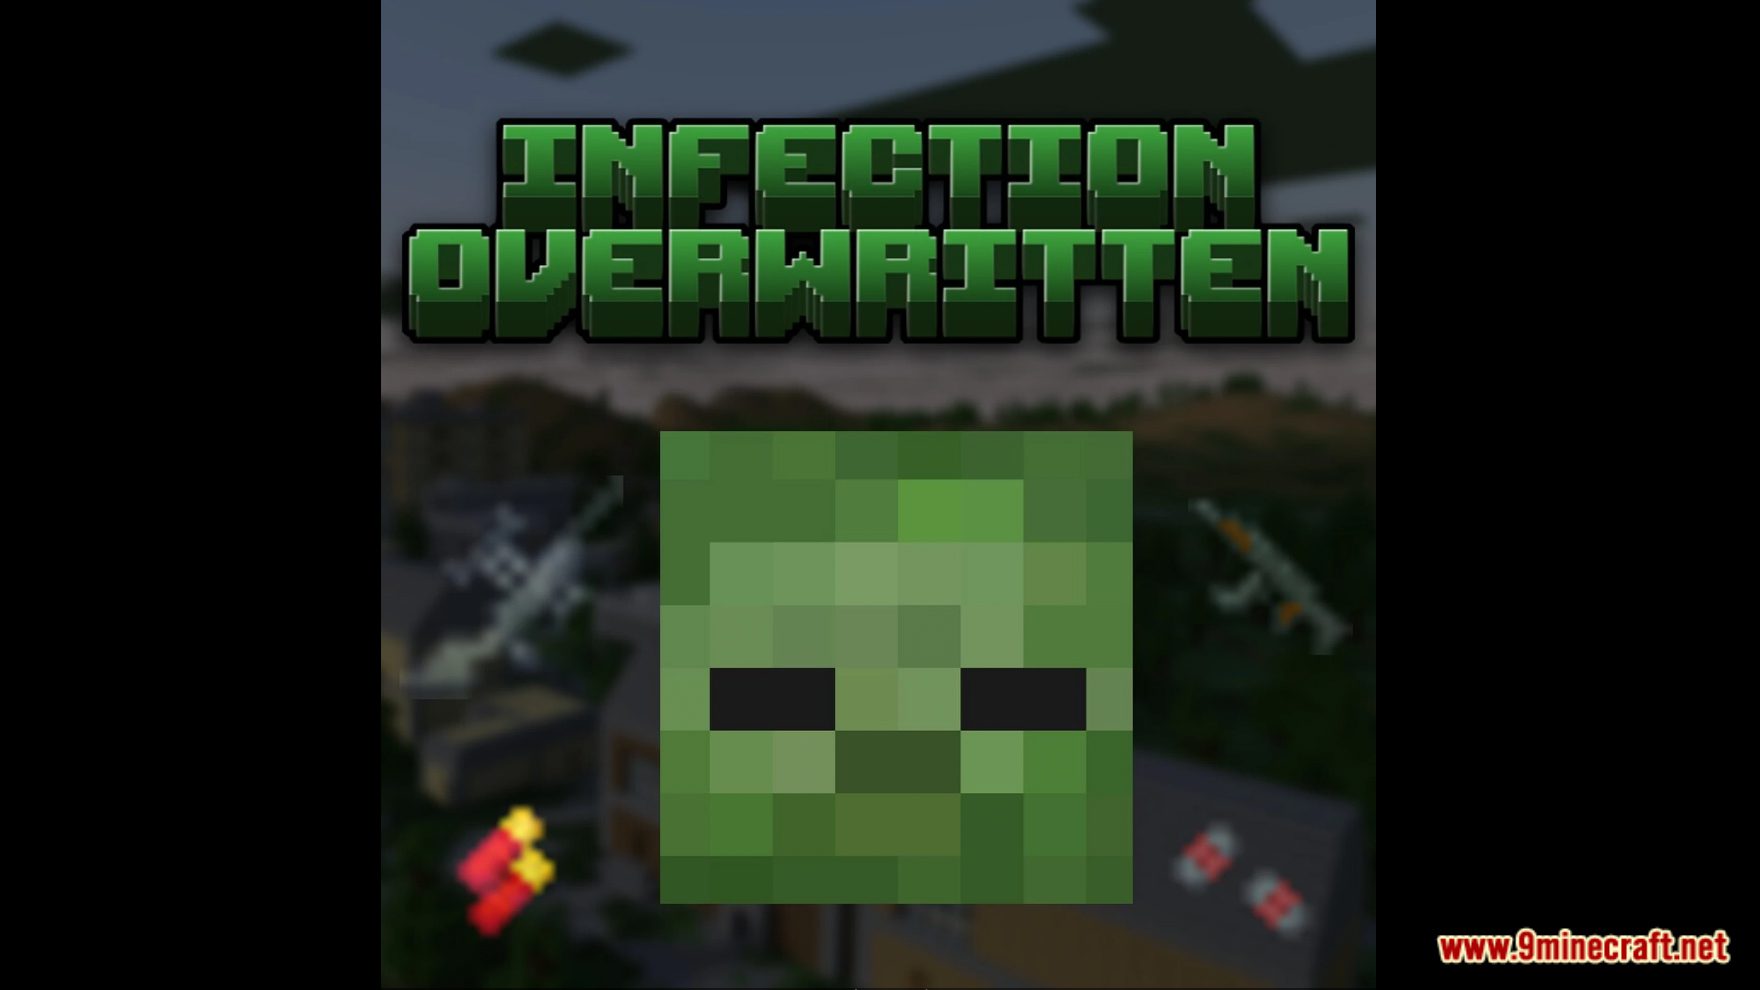 Calamity Mod: Astral Infection recreated in minecraft Minecraft Data Pack